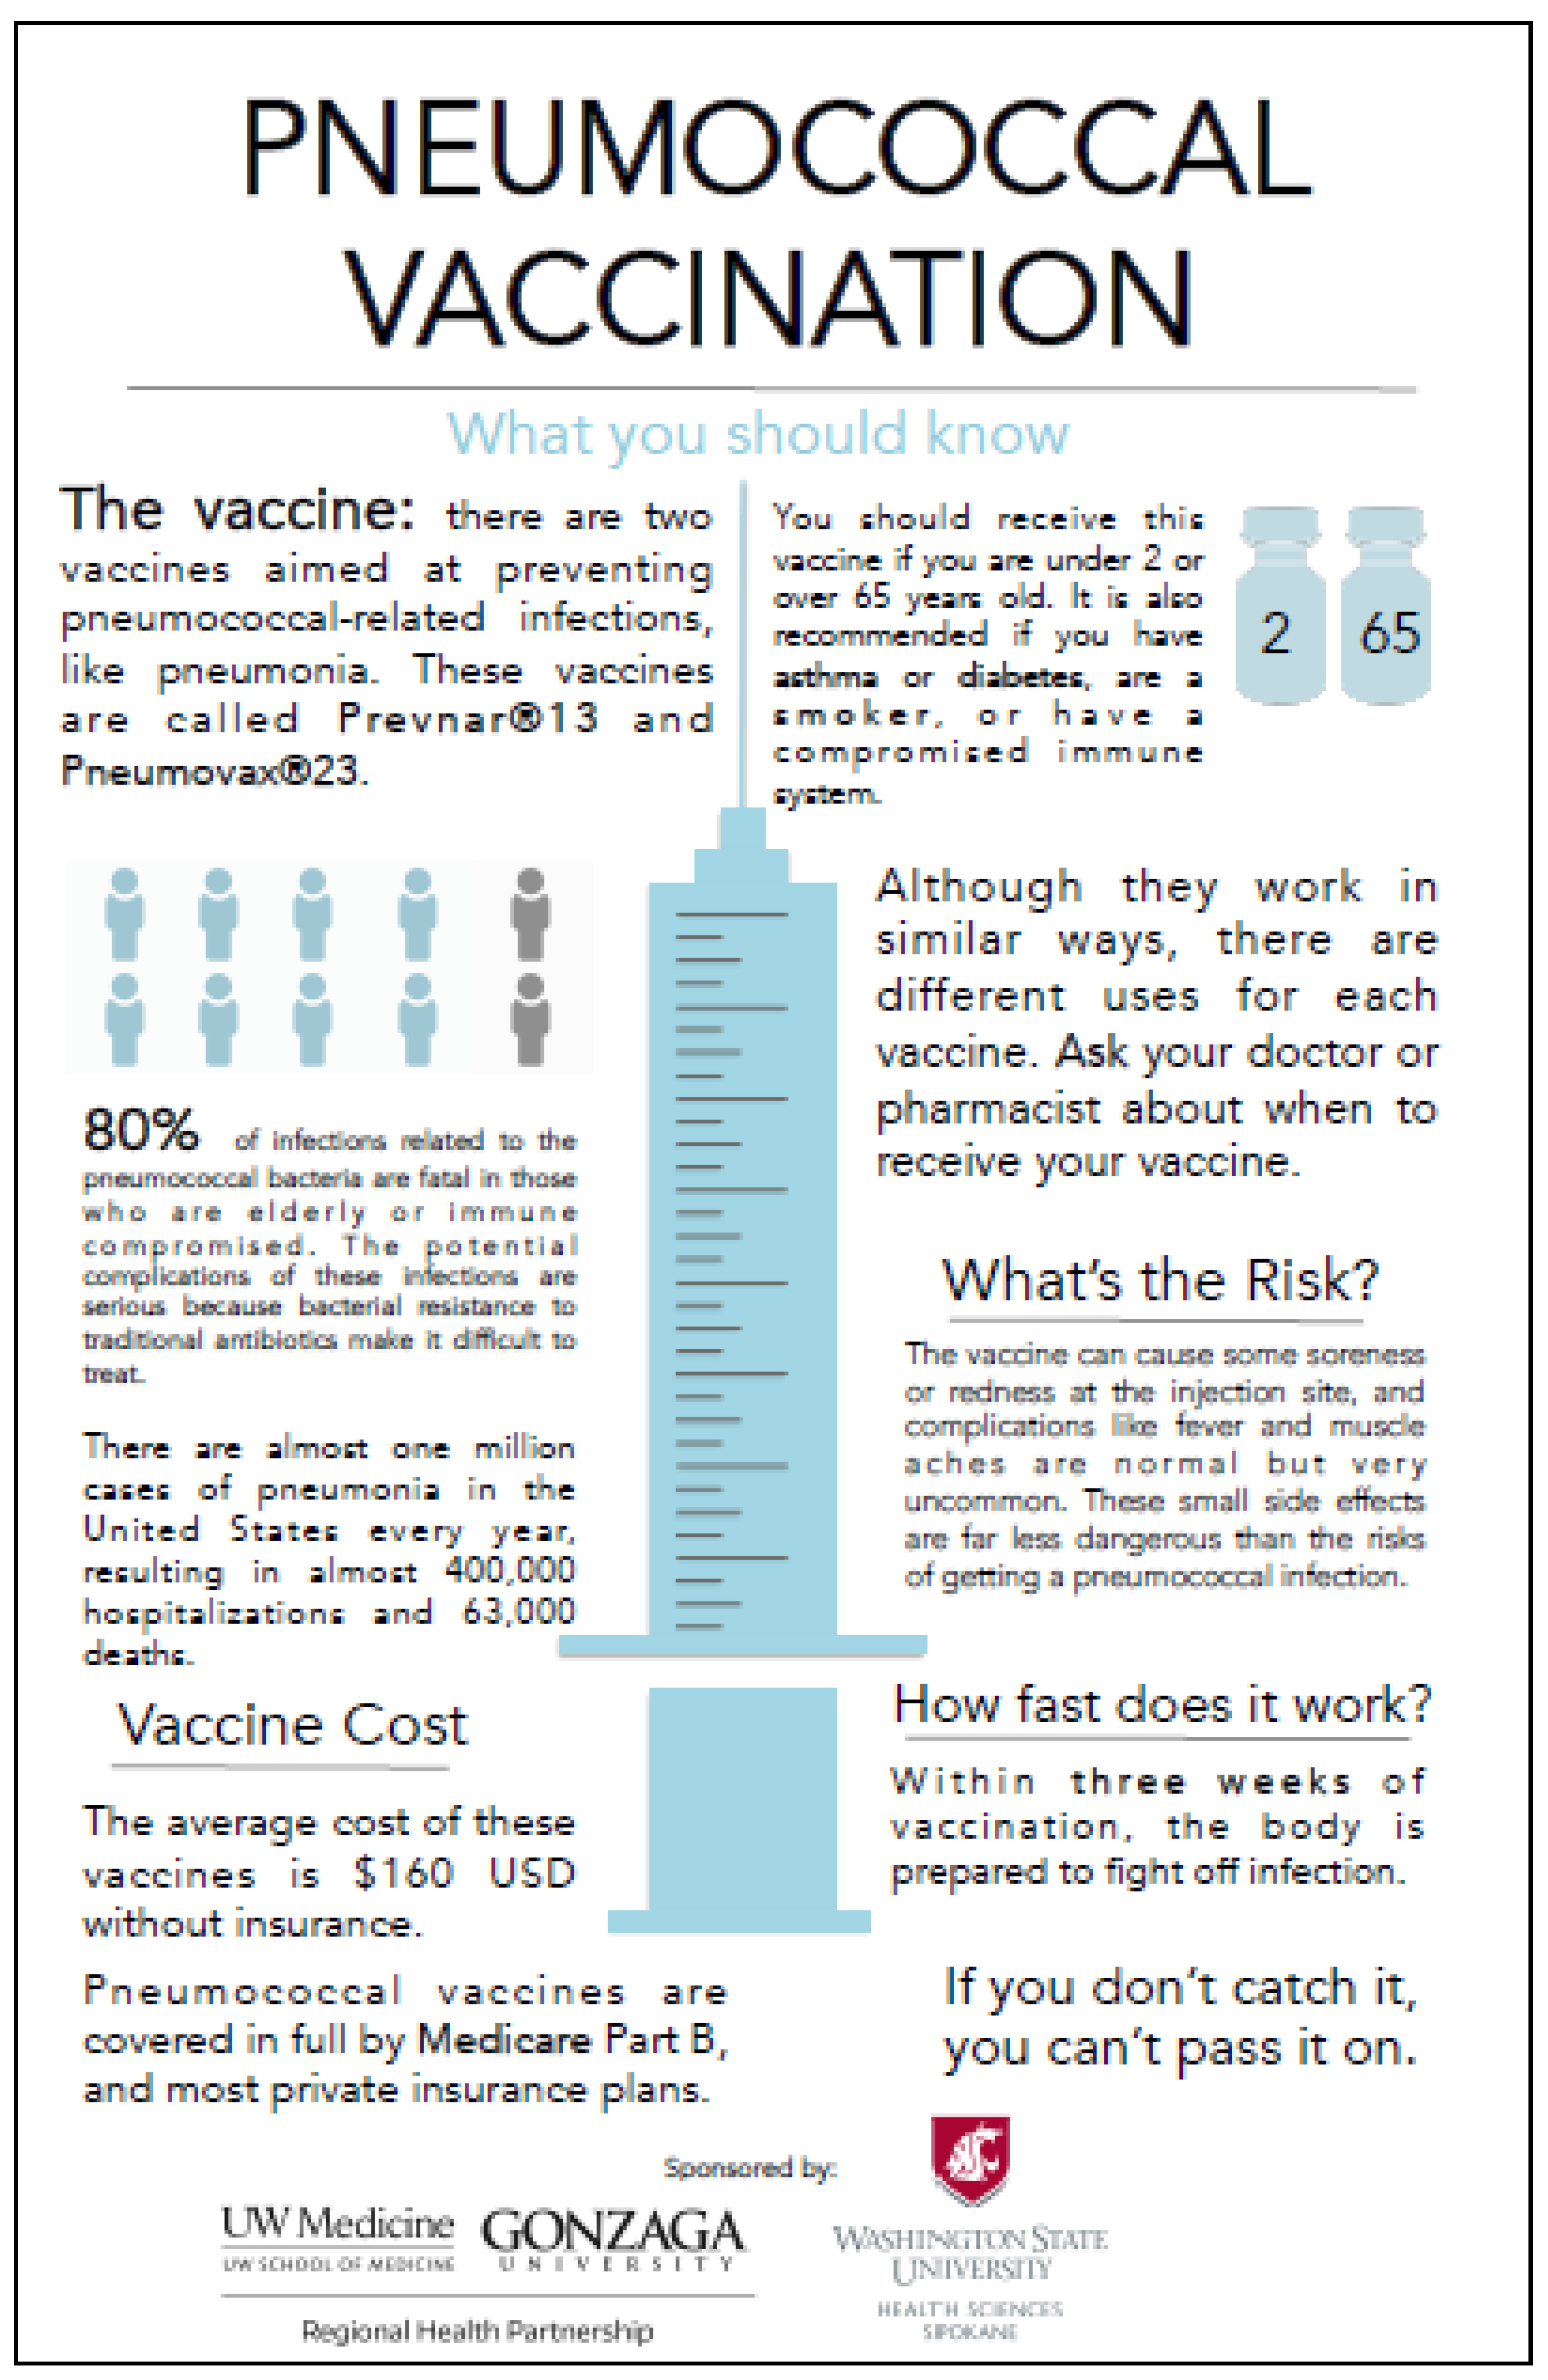 vaccines-free-full-text-improving-pneumococcal-vaccination-rates-hot